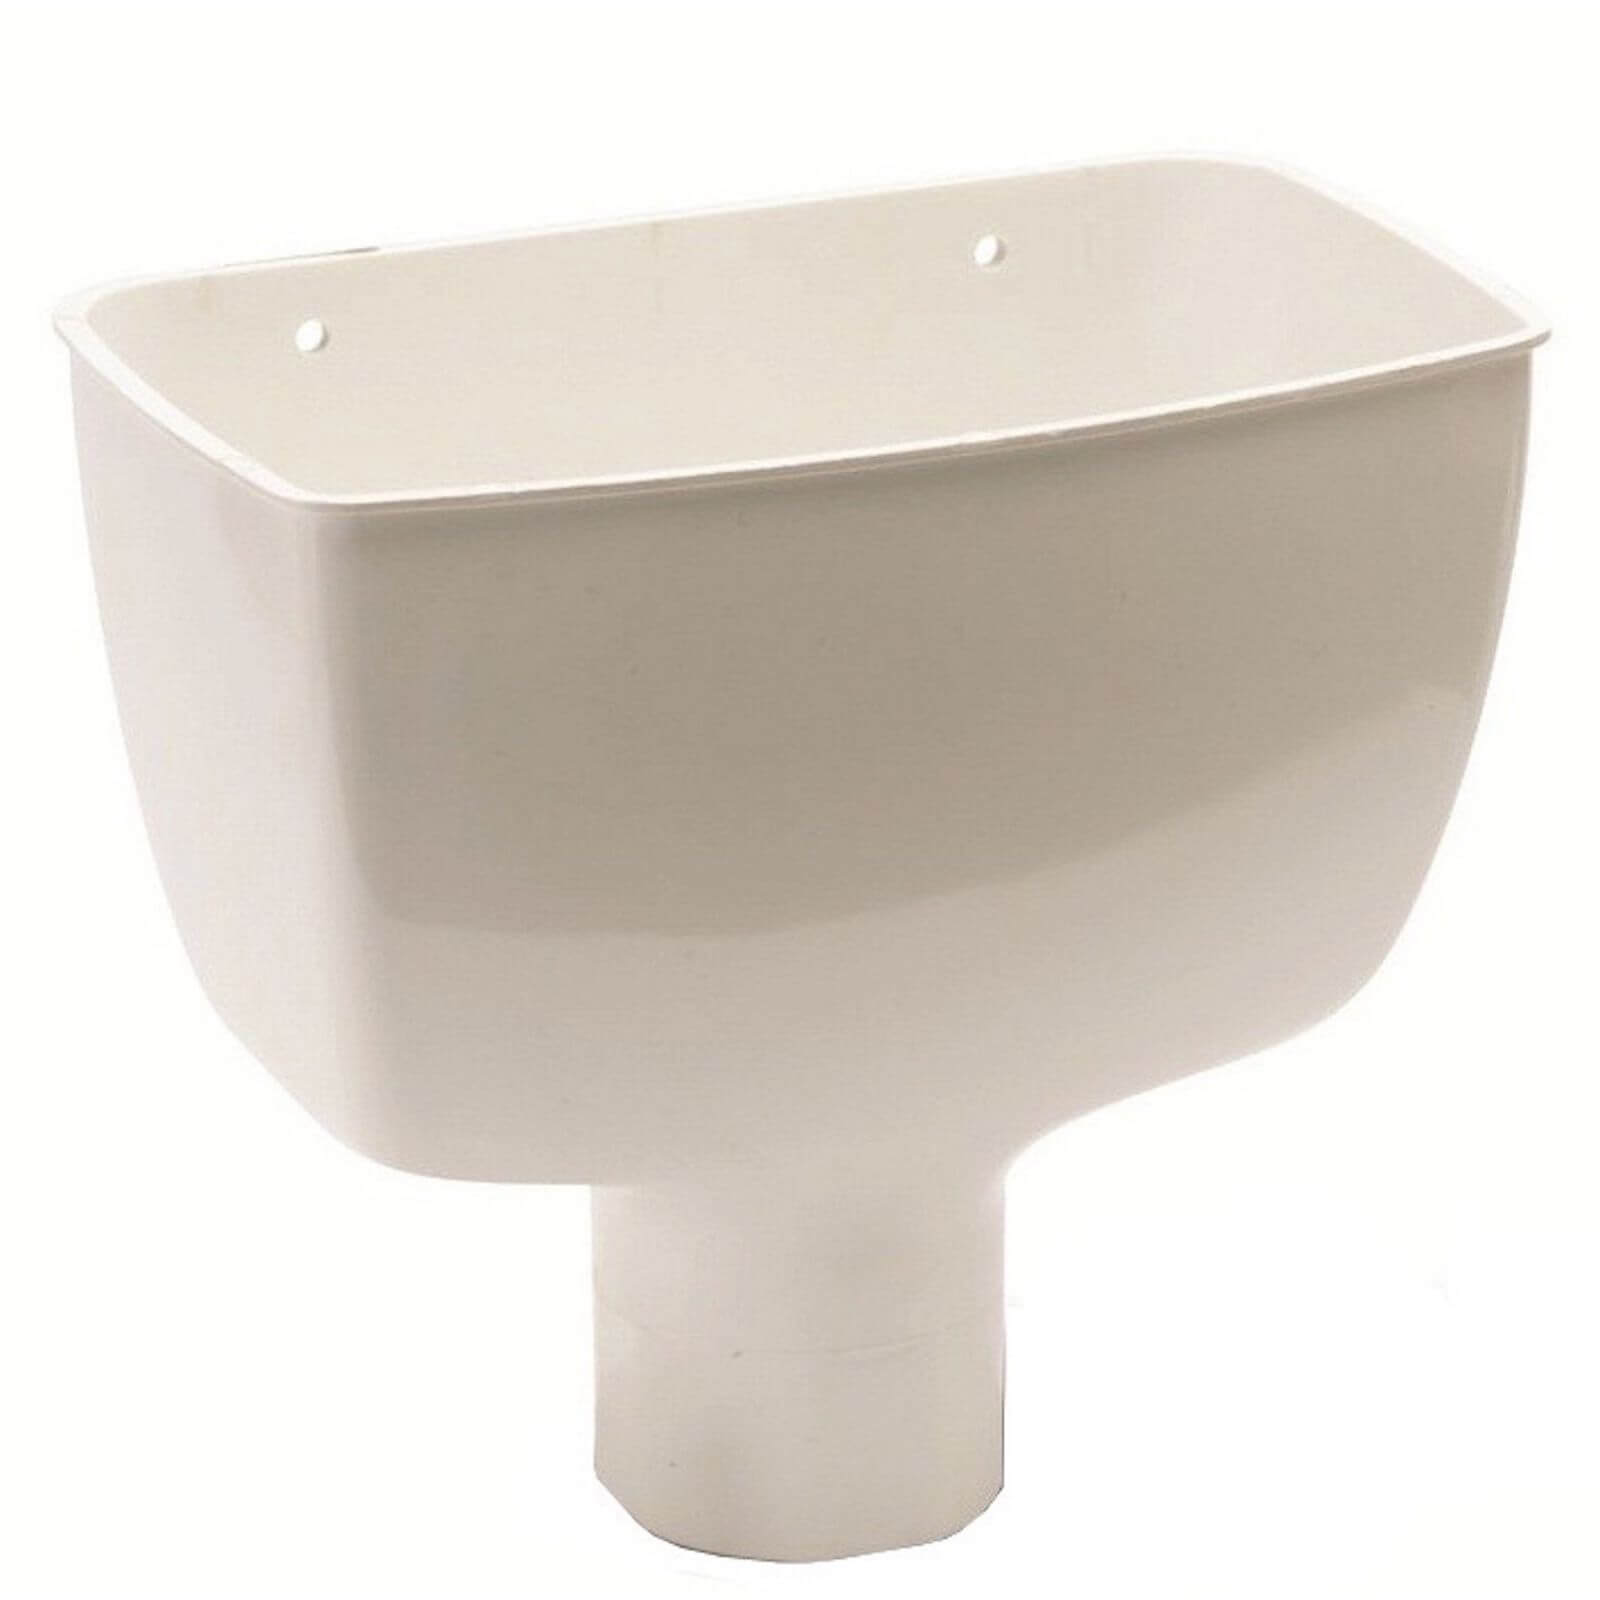 Photo of Polypipe Round Standard Hopper Head - 68mm - White